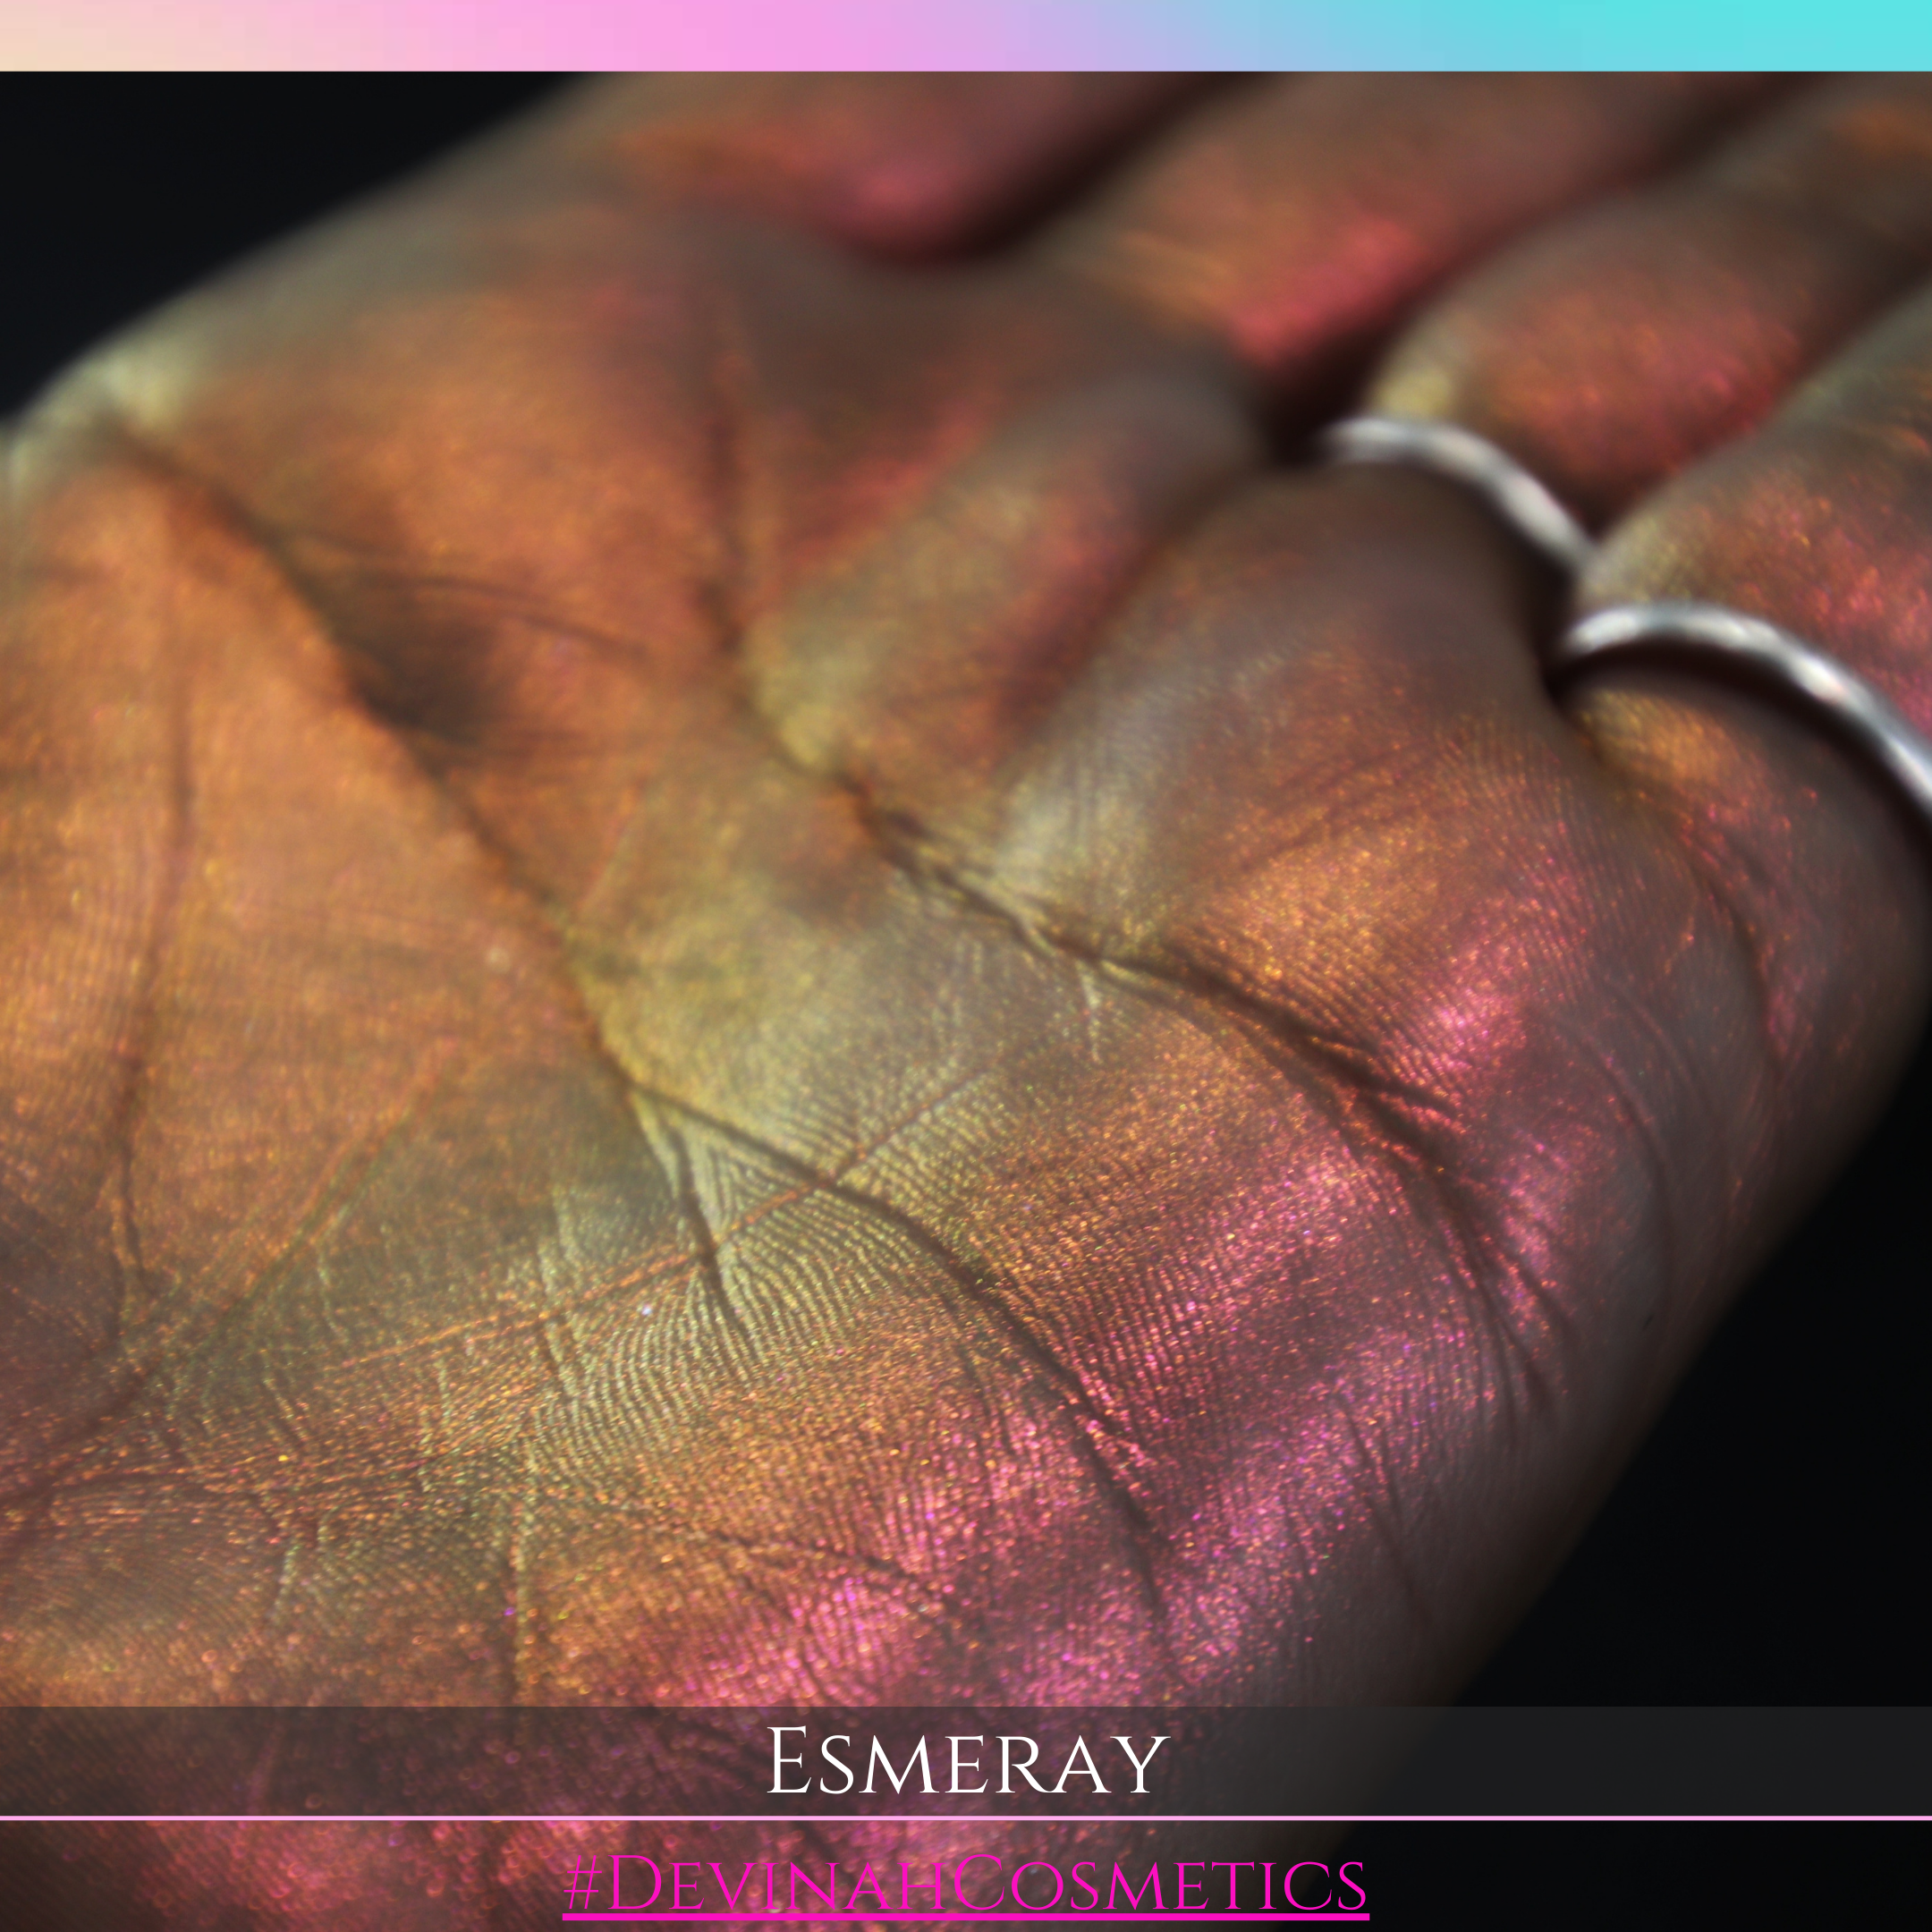 Esmeray dark moon  multichrome shifting with colors of red pink yellow and orange